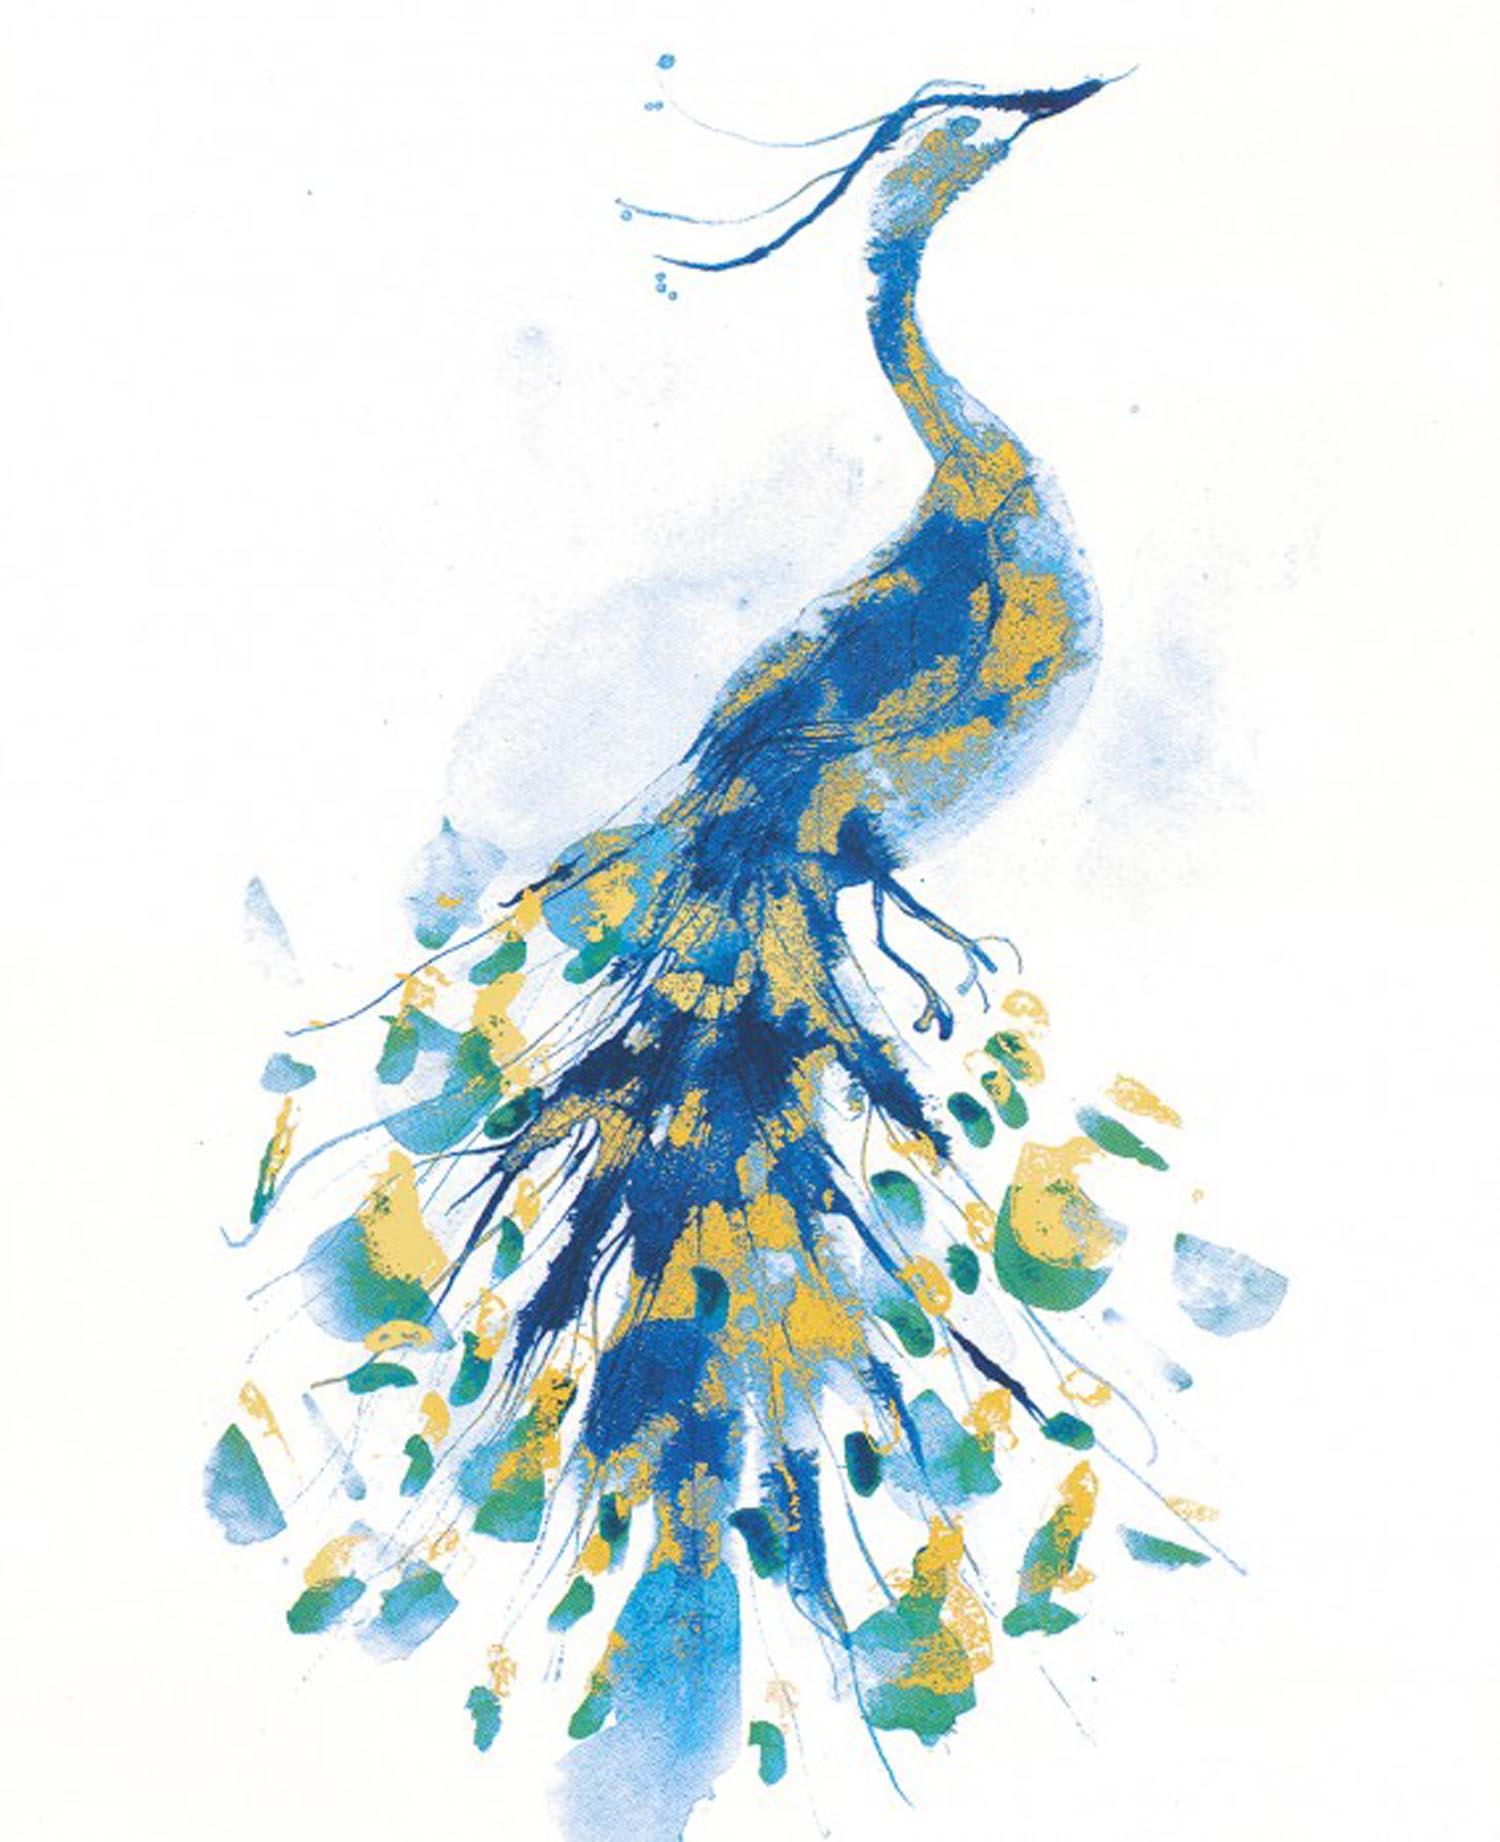 Peacock Gold
A beautiful CYMK silk screen print by Gavin Dobson. 
Based on an original watercolour painting of this iconic bird, this popular piece of art is individually hand printed by the artist using half tones to create the layered blues and